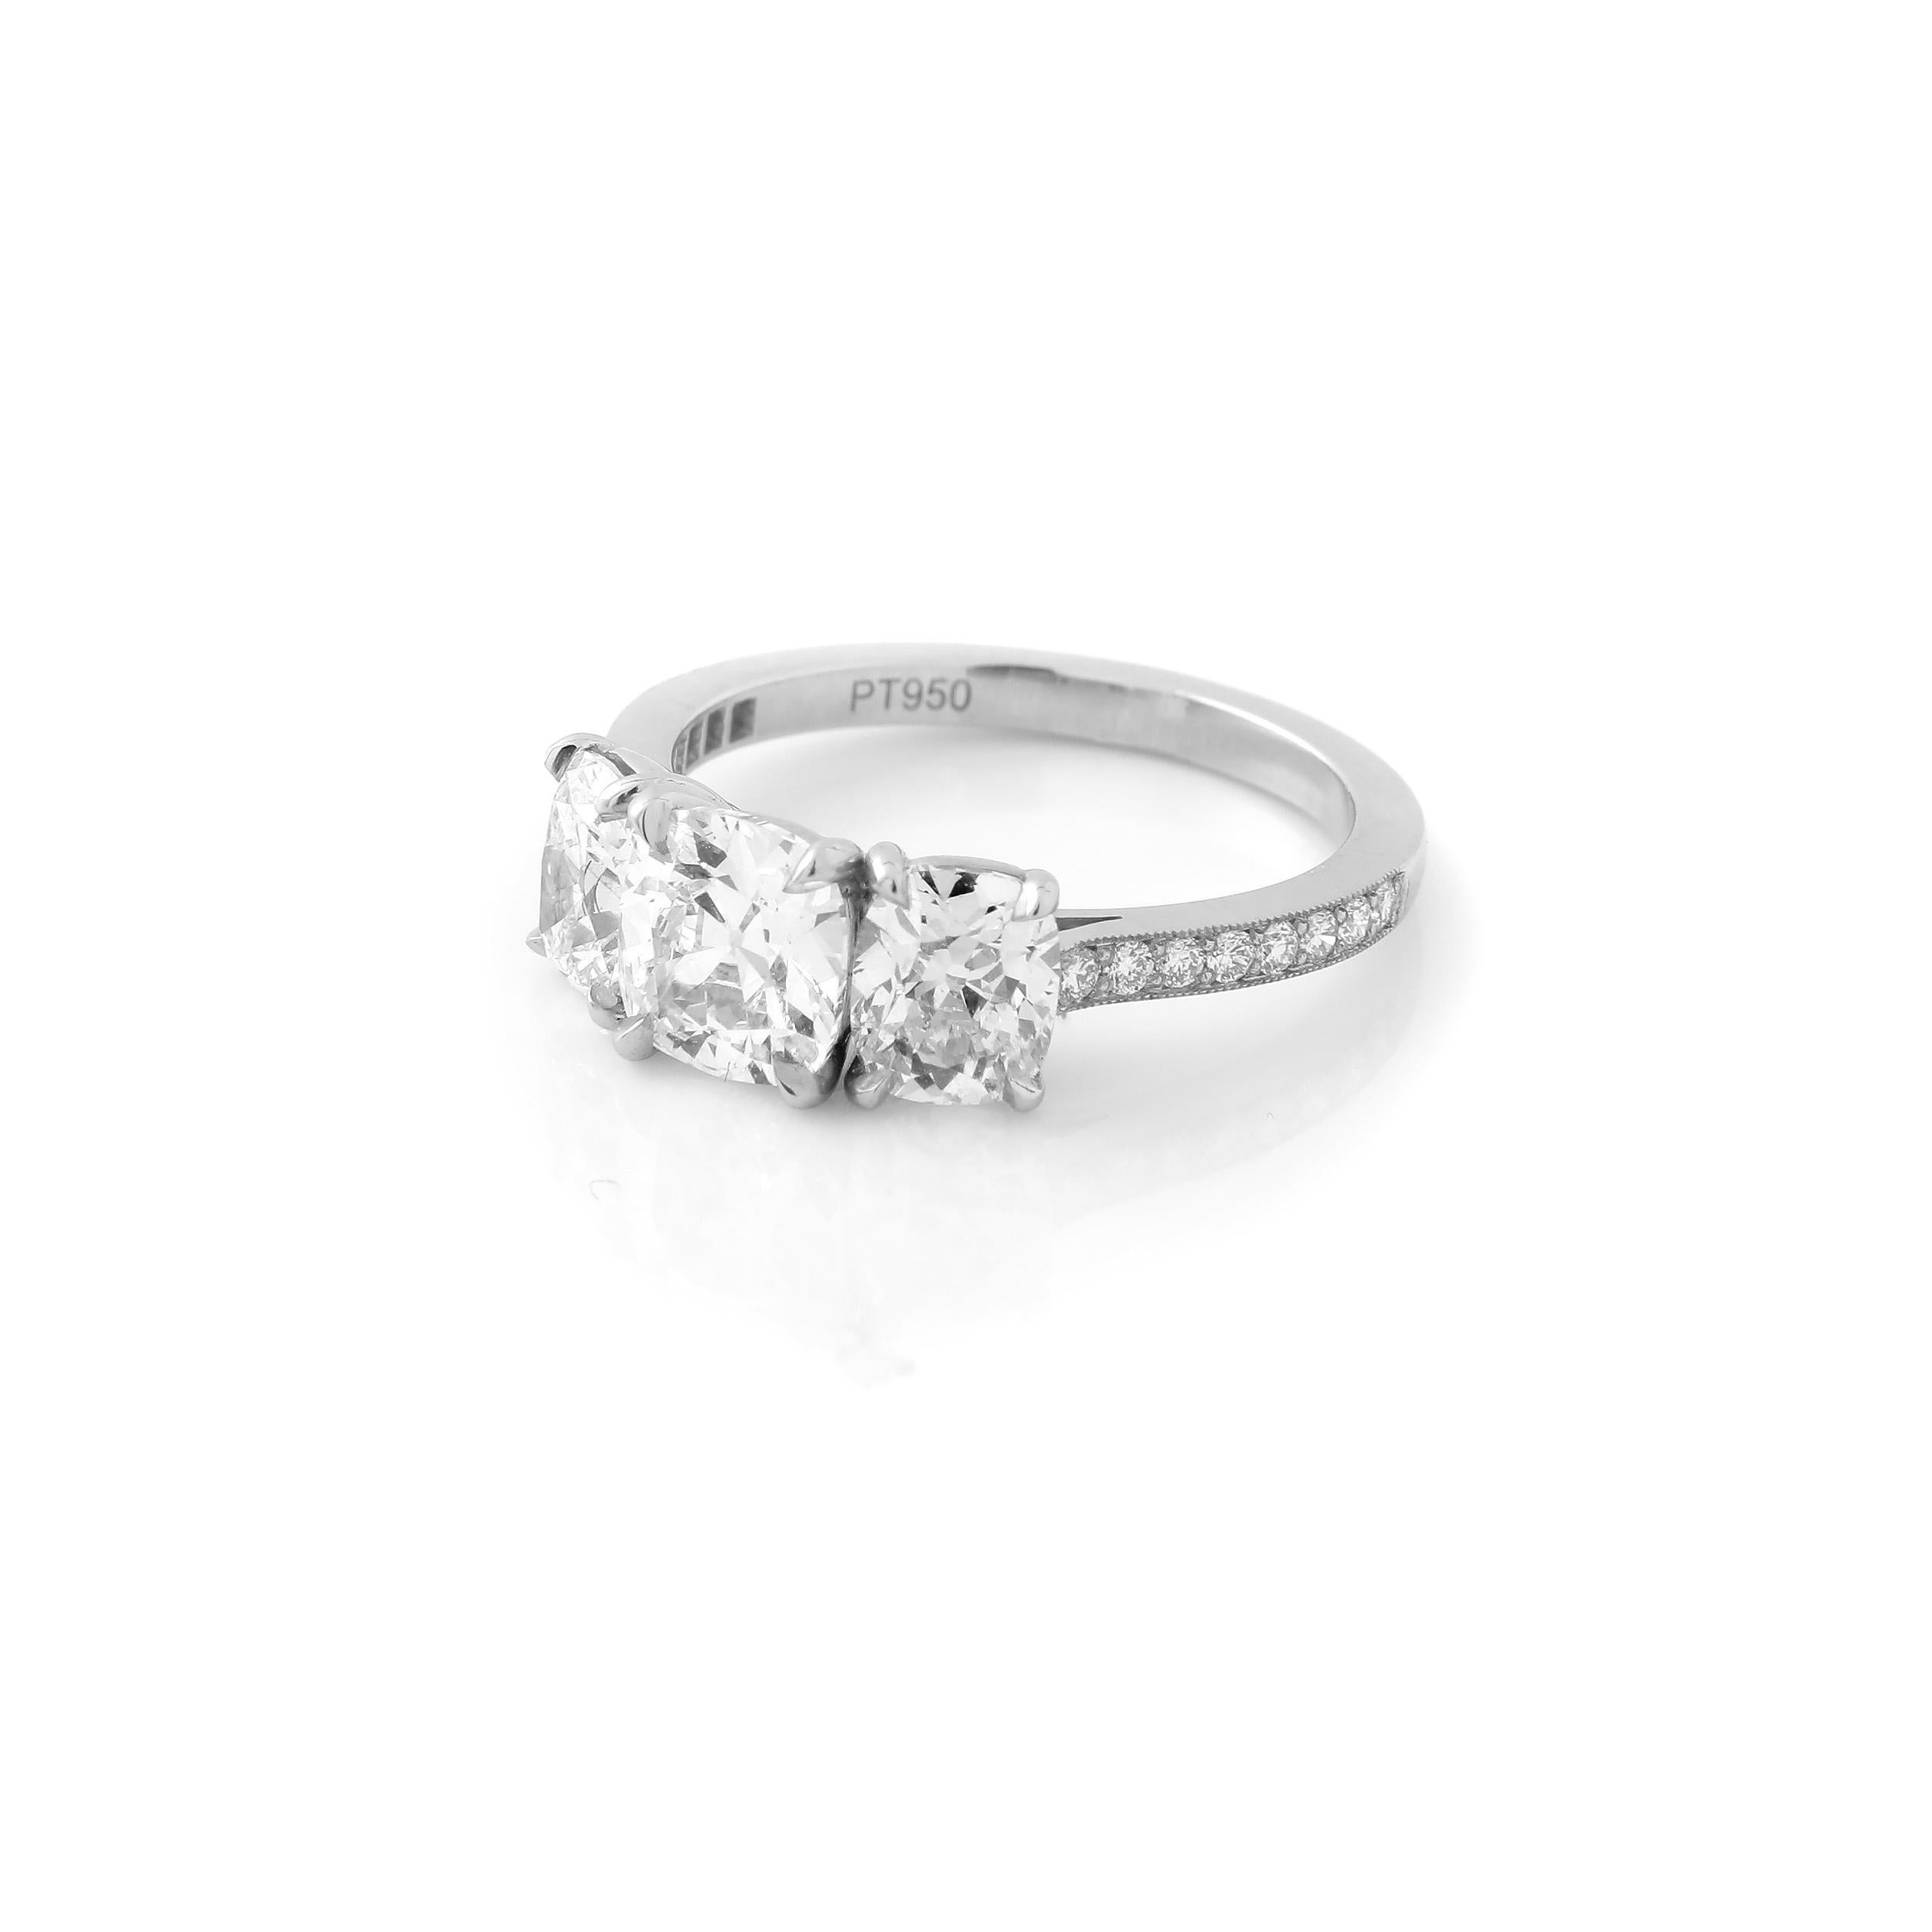 This classic three-stone ring features a GIA certified 1.06 carat D VVS1 antique-cut cushion center and a pair of D/E VS antique-cut cushion side stones, weighing 1.45 carats. The three cushion diamonds are set in a timeless pavé platinum mounting,